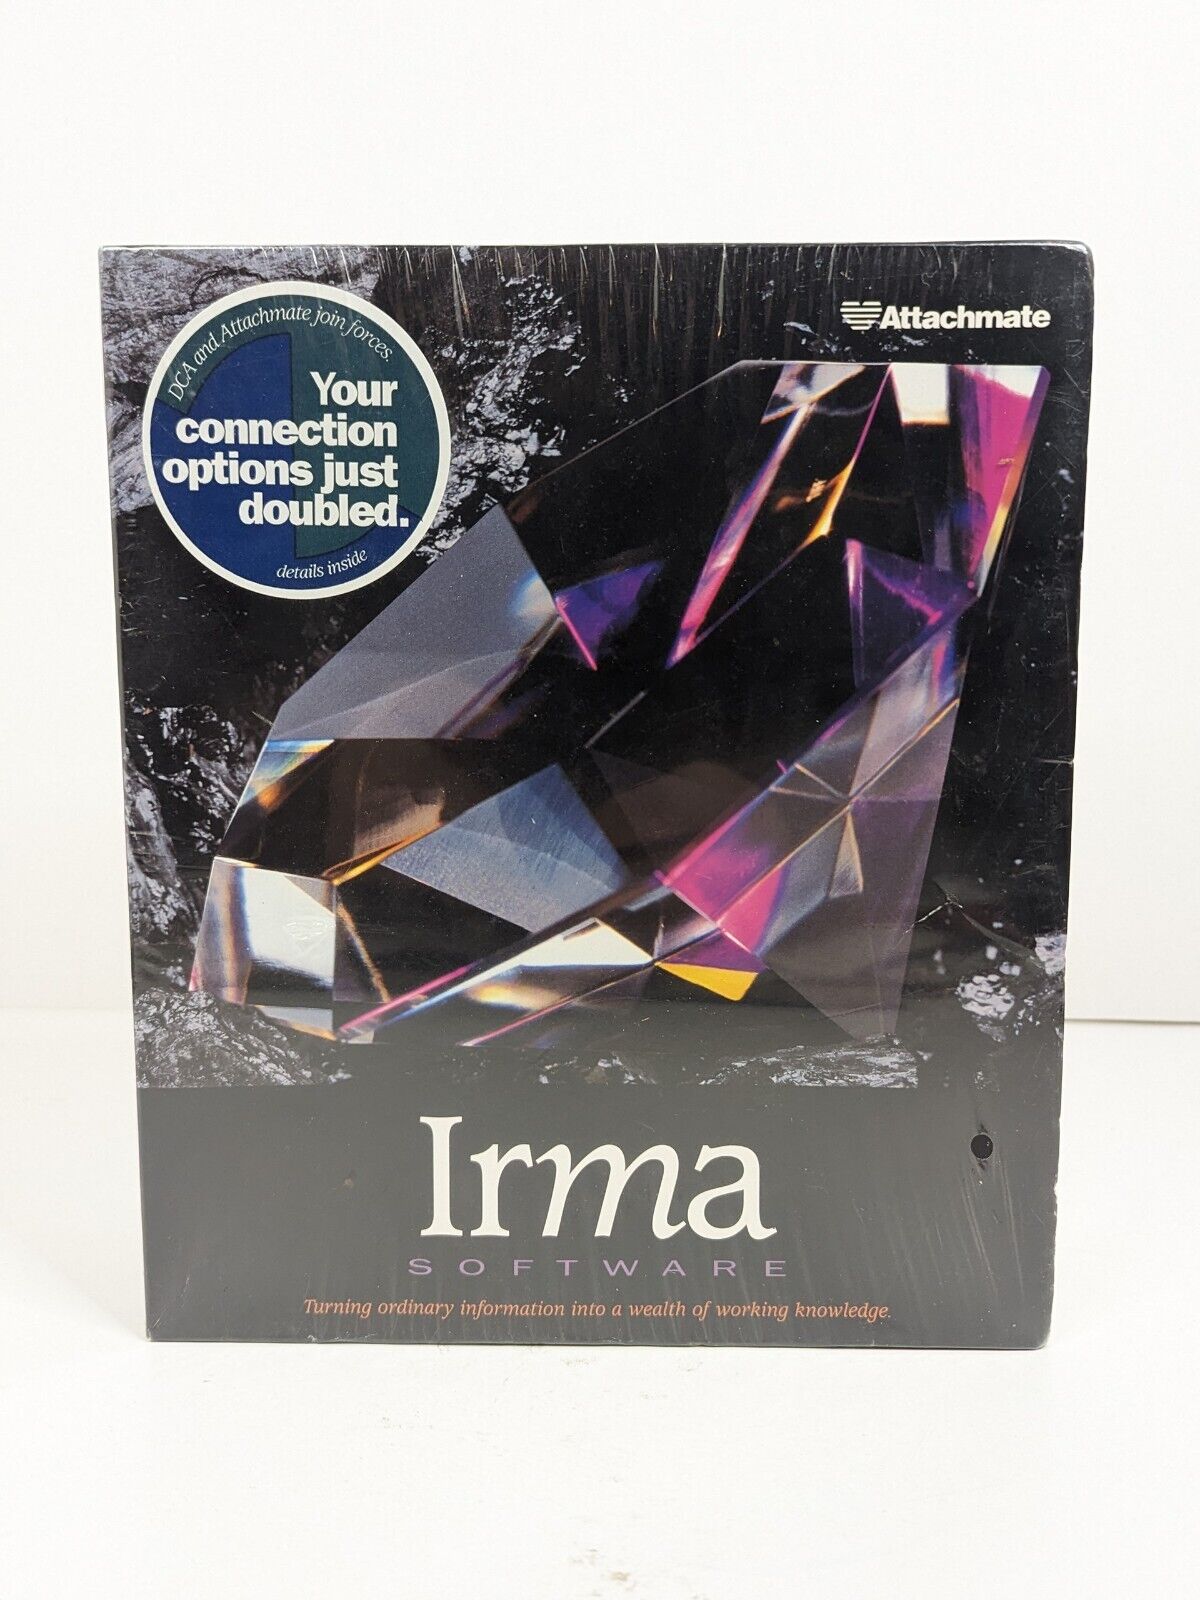 Irma Software for The Mainframe Windows 3.1 Single User Attachmate 1995 New